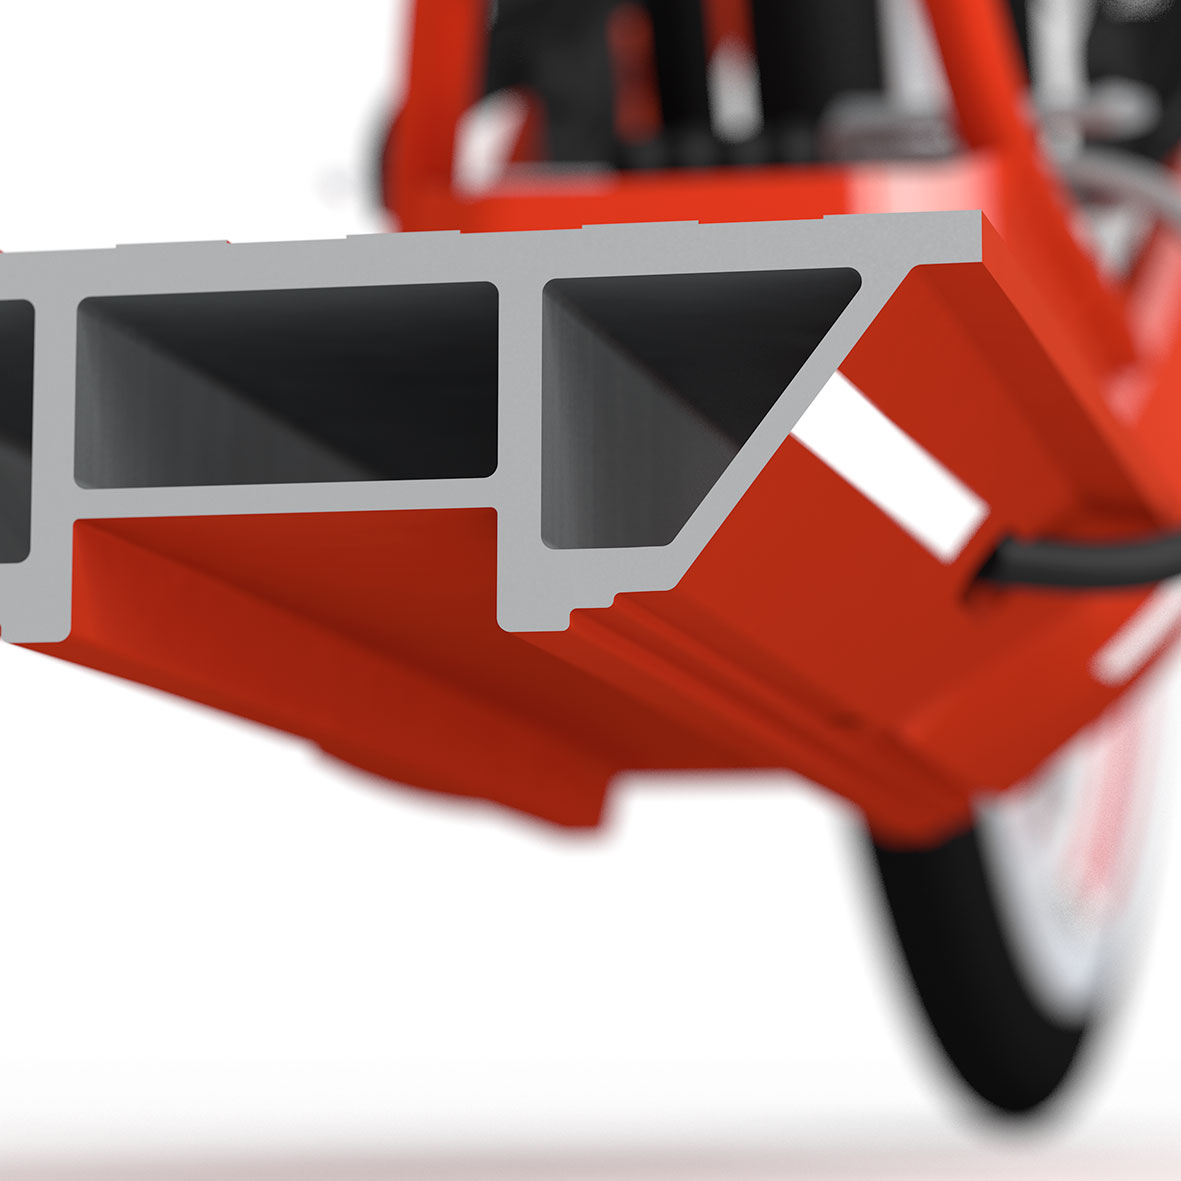 The sophisticated footboard shape minimizes scooter-terrain interface and allows for a safe tilt round bends.